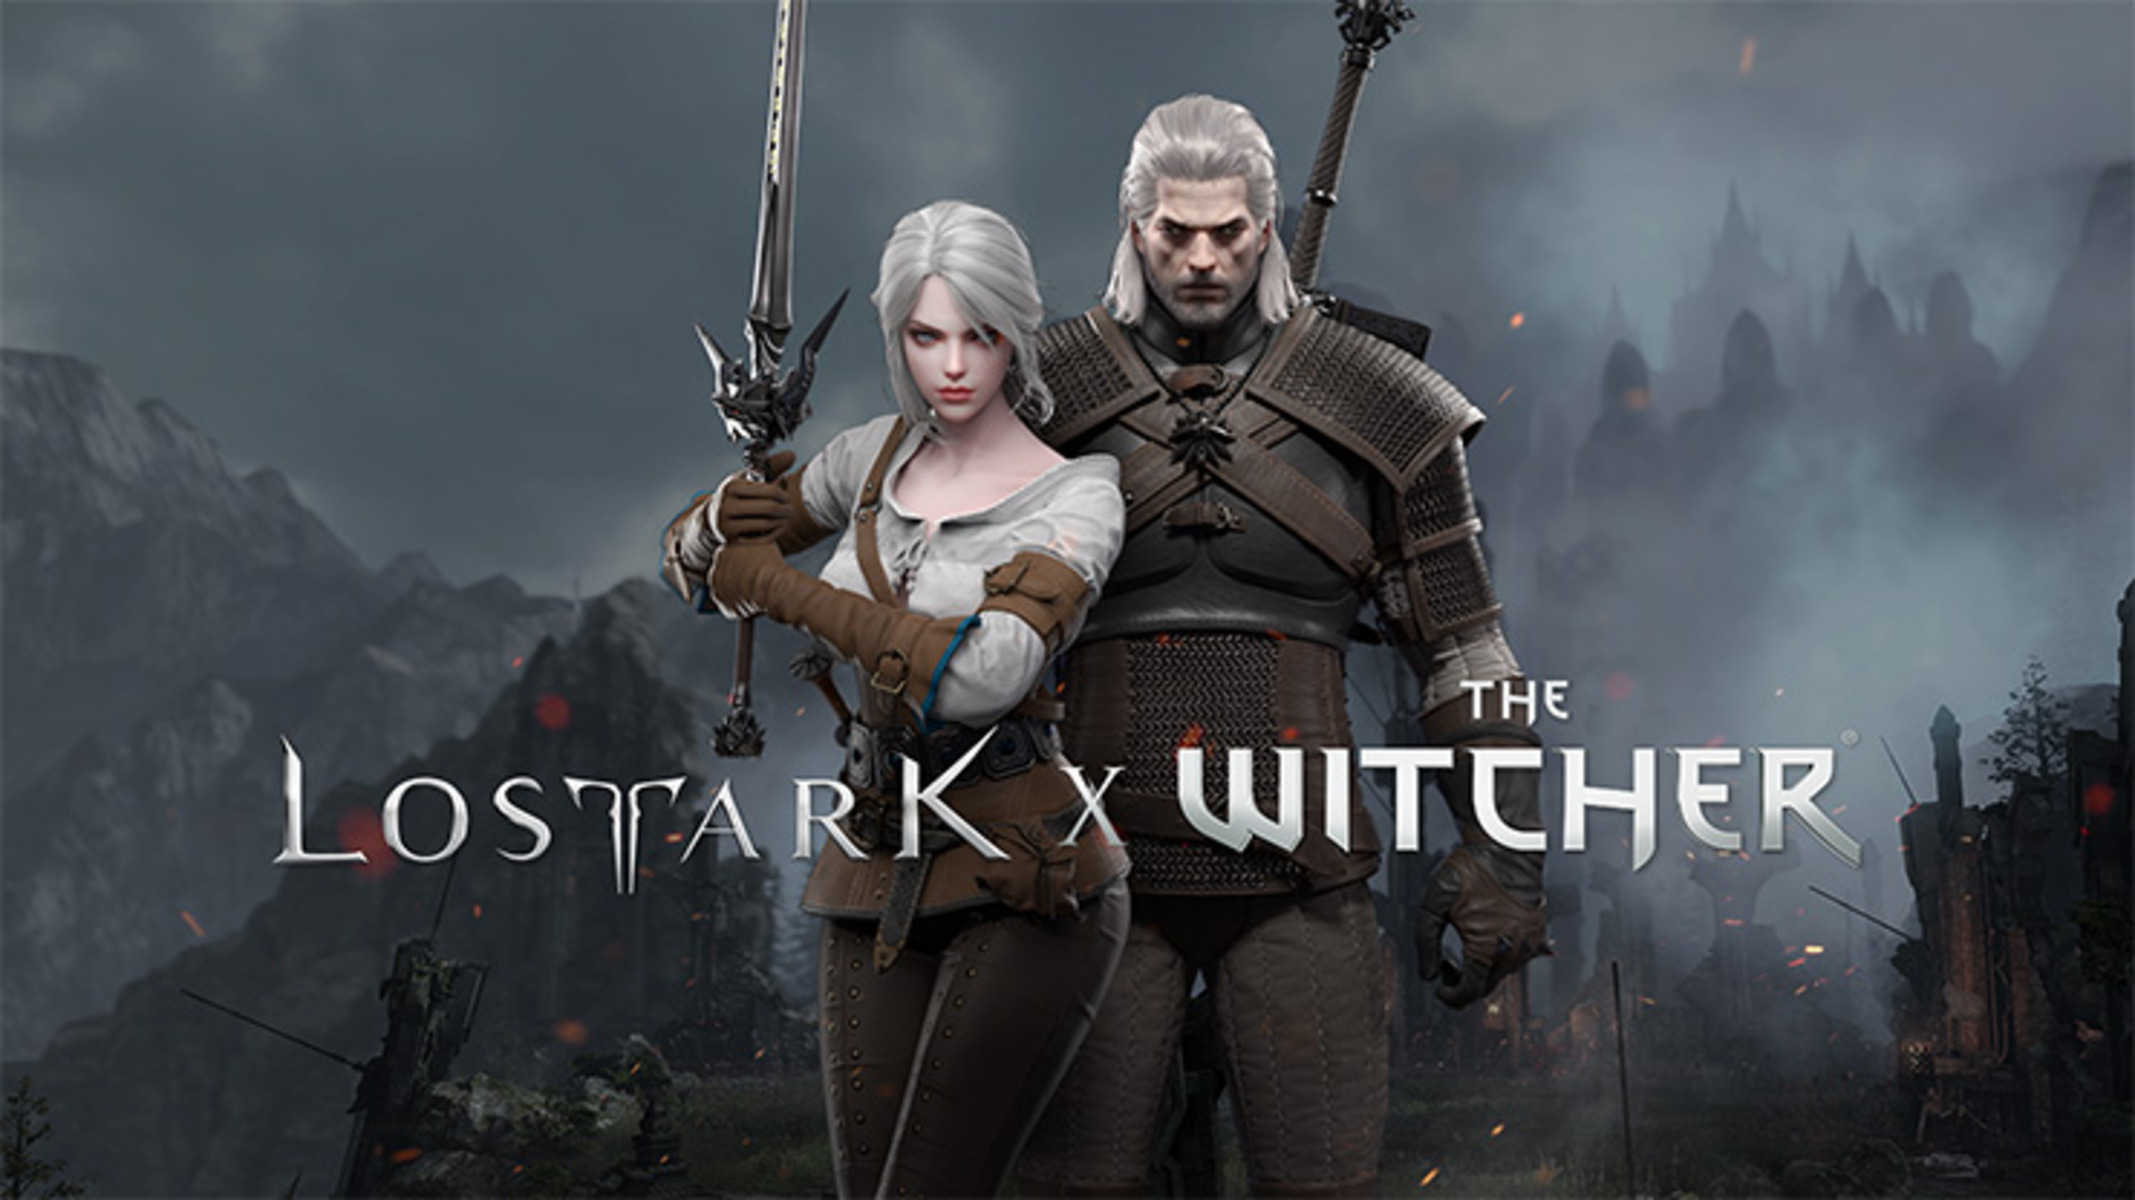 Crossover lost ark e the witcher